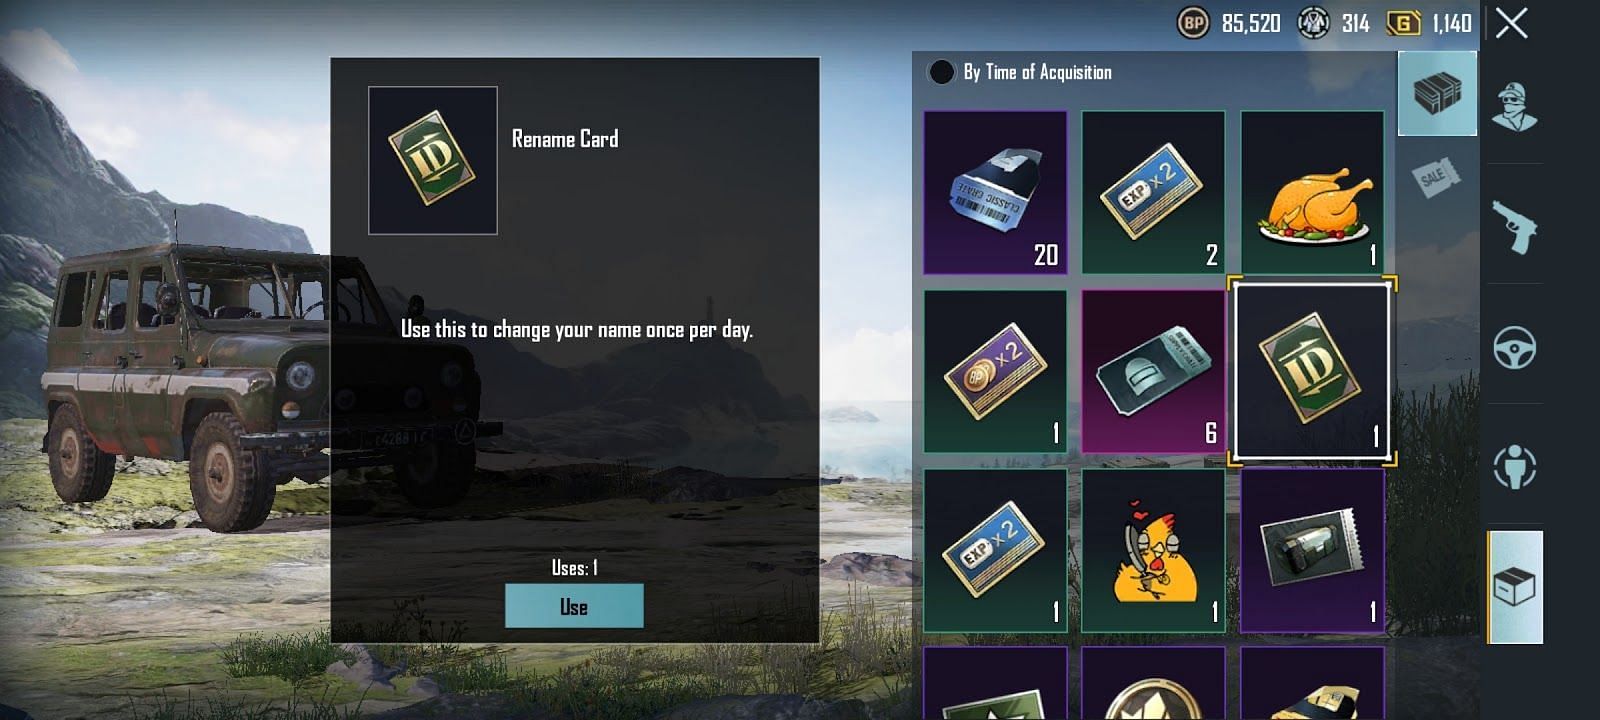 One can acquire a free Rename Card via Level 10 of Battlegrounds Mobile India (Image via Krafton)